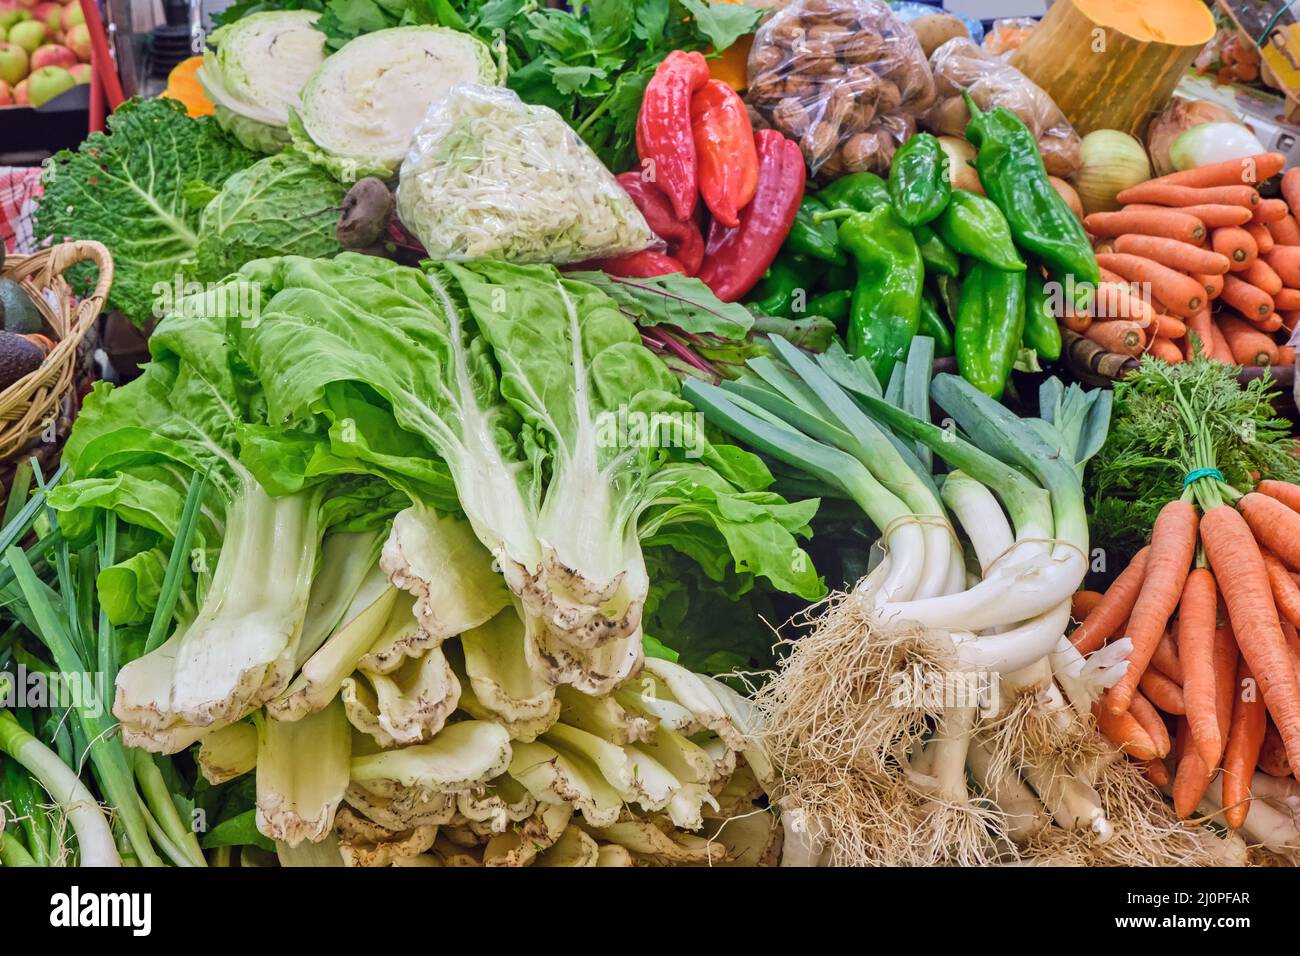 Great choice of fresh vegetables and salad seen at a market stall Stock Photo